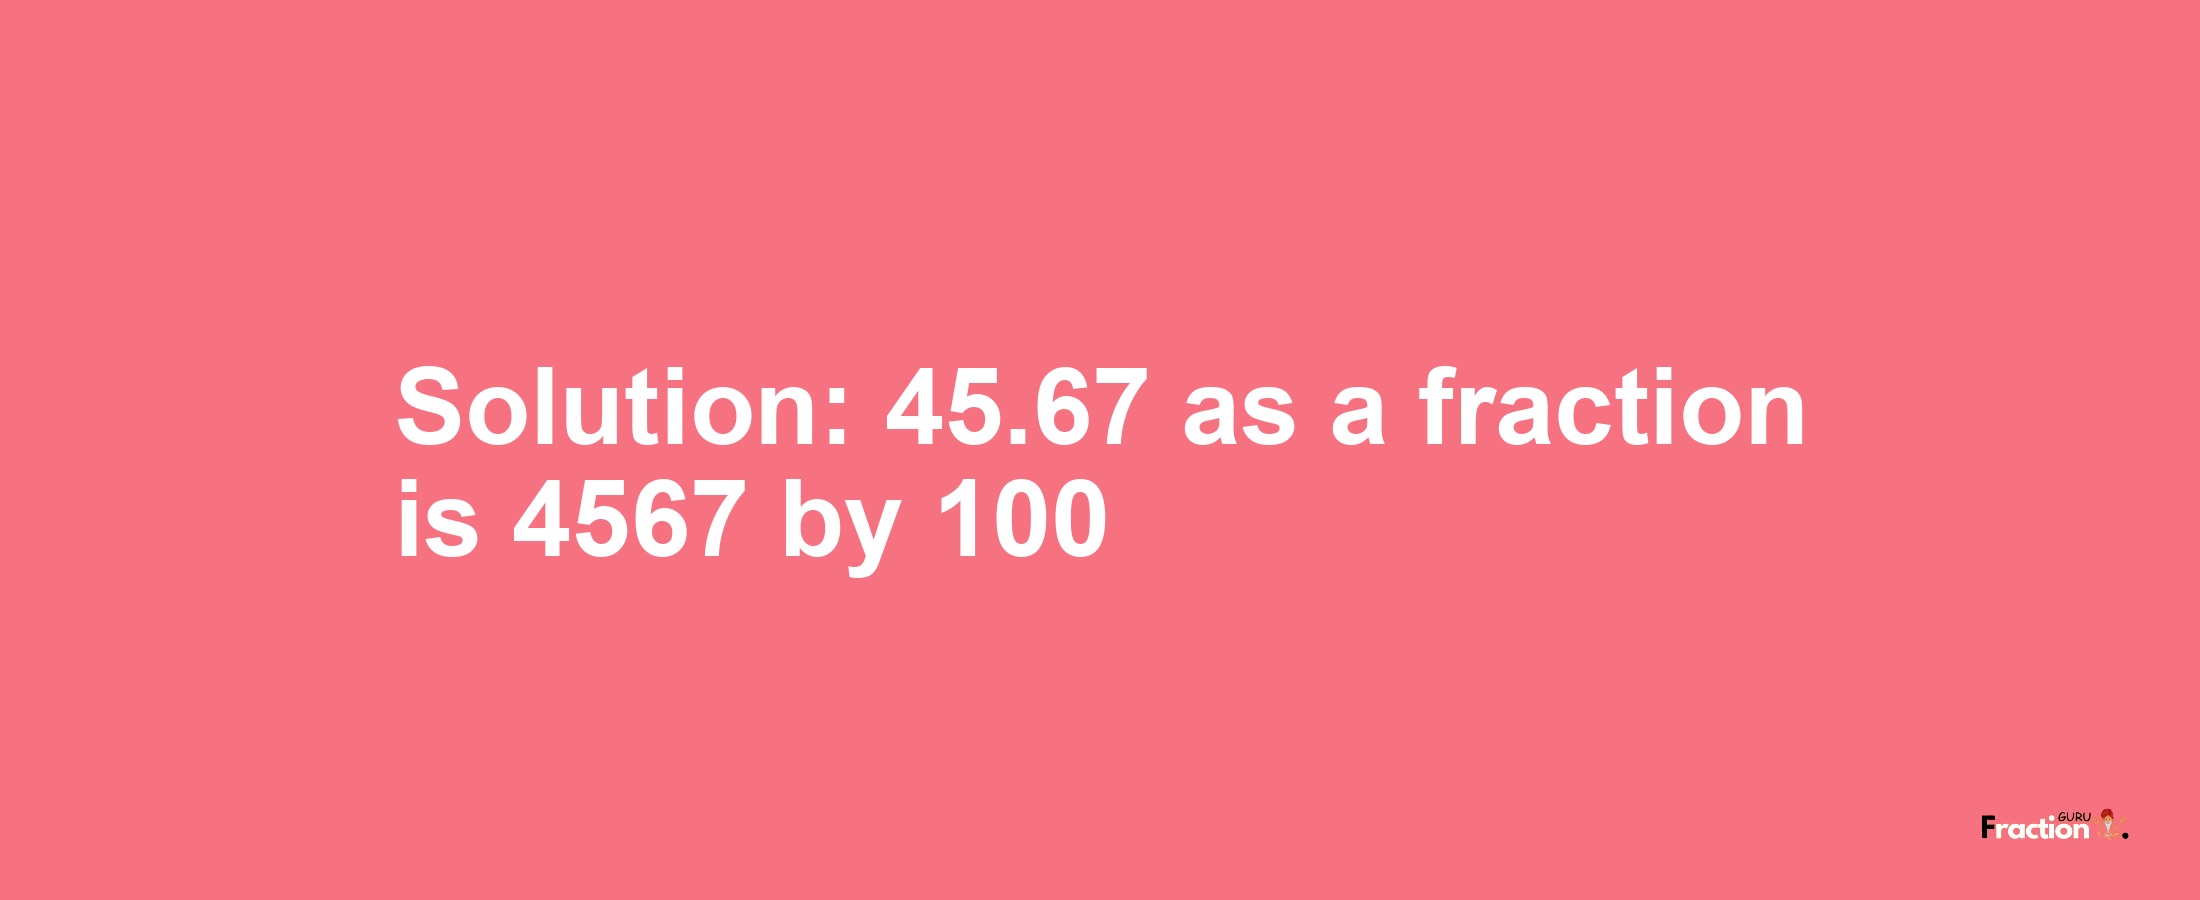 Solution:45.67 as a fraction is 4567/100